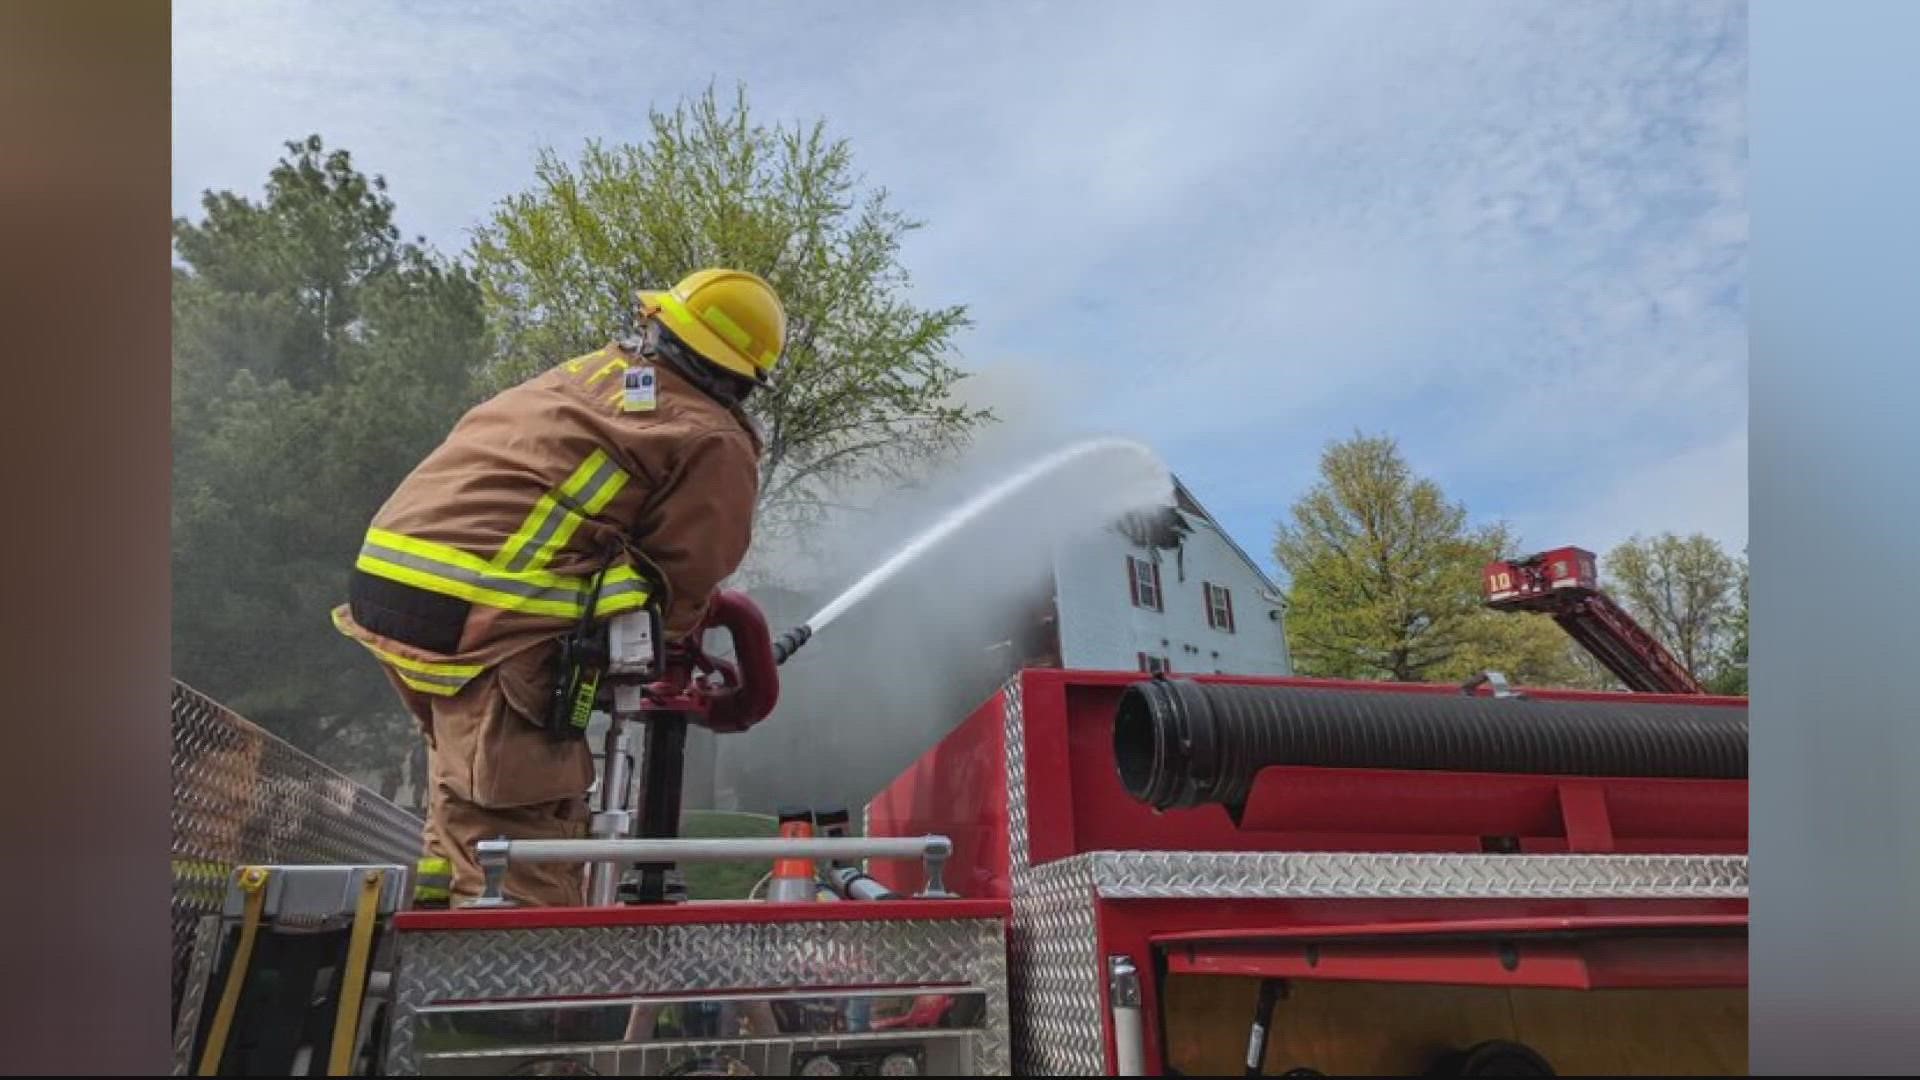 Local firefighters are using new techniques to lower their cancer risks, what are they?